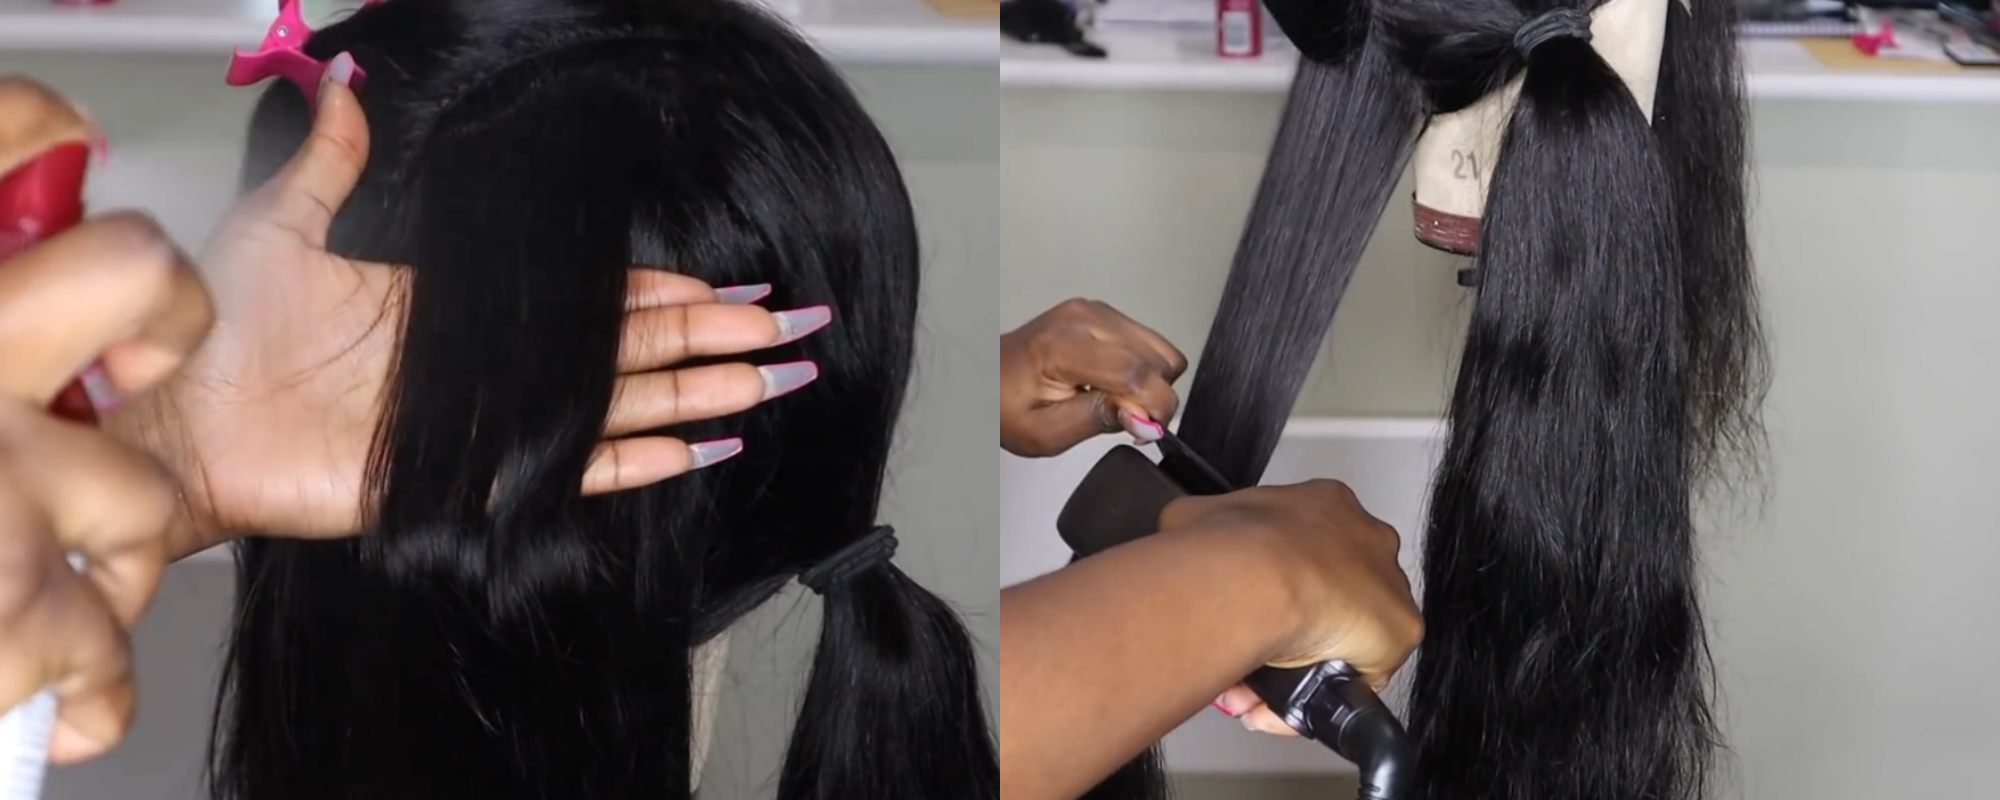 how to straighten a wig